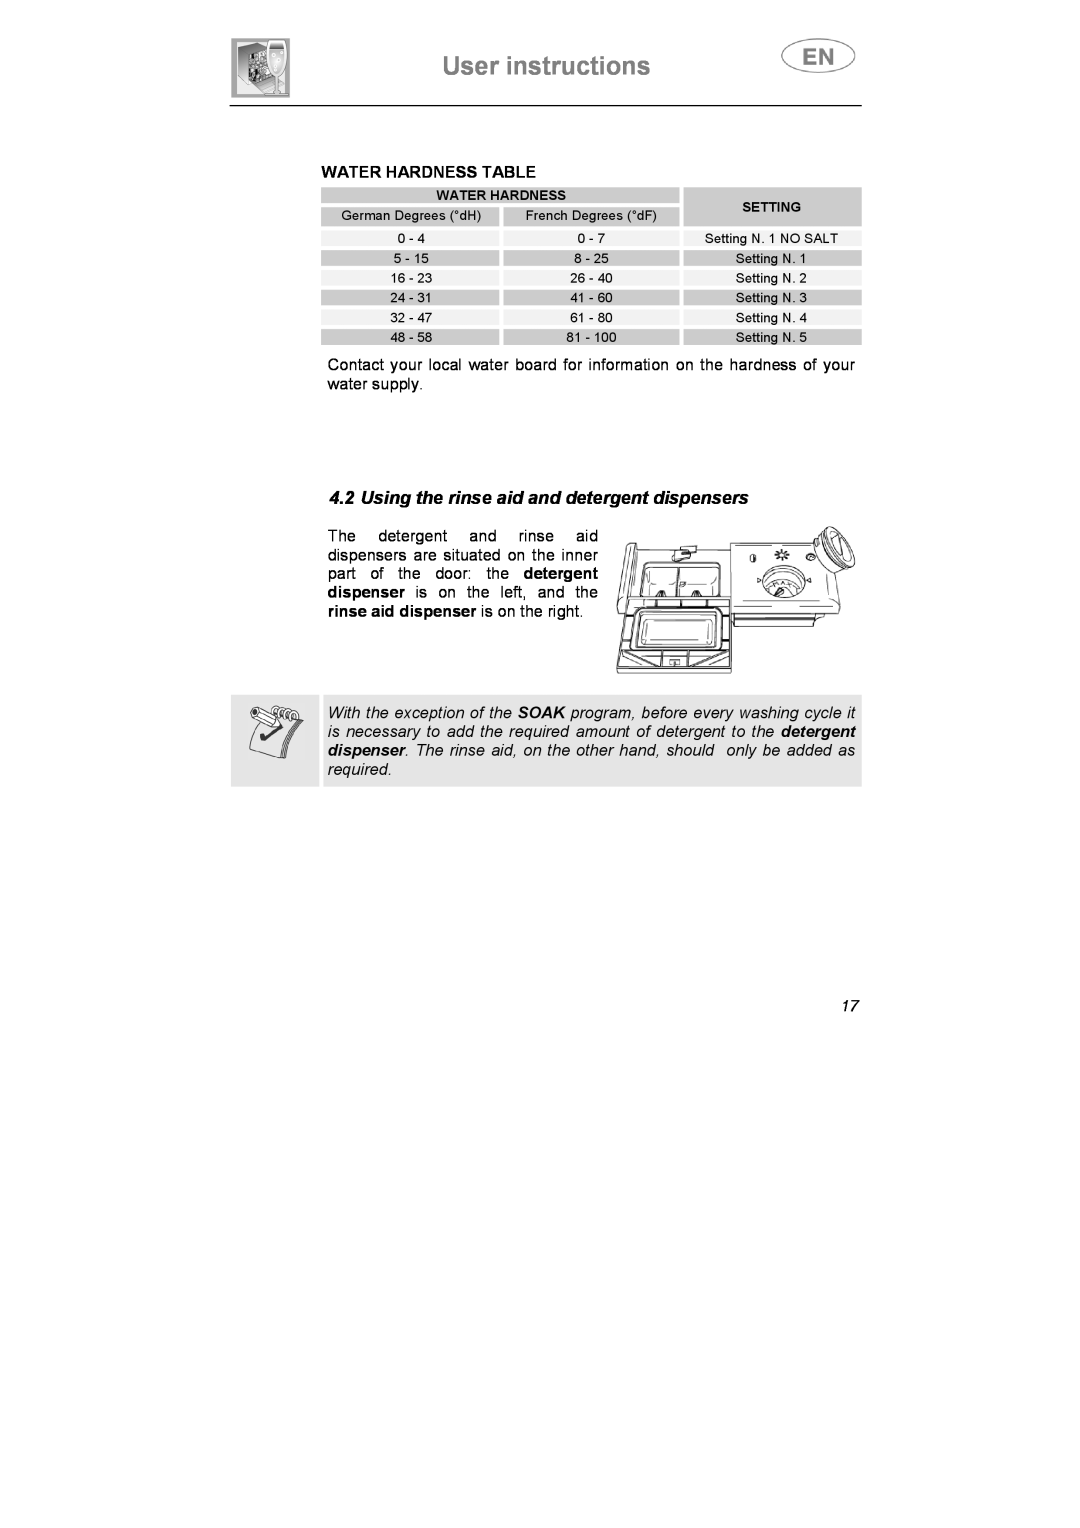 Smeg STA645Q manual User instructions, Using the rinse aid and detergent dispensers, Water Hardness Table 